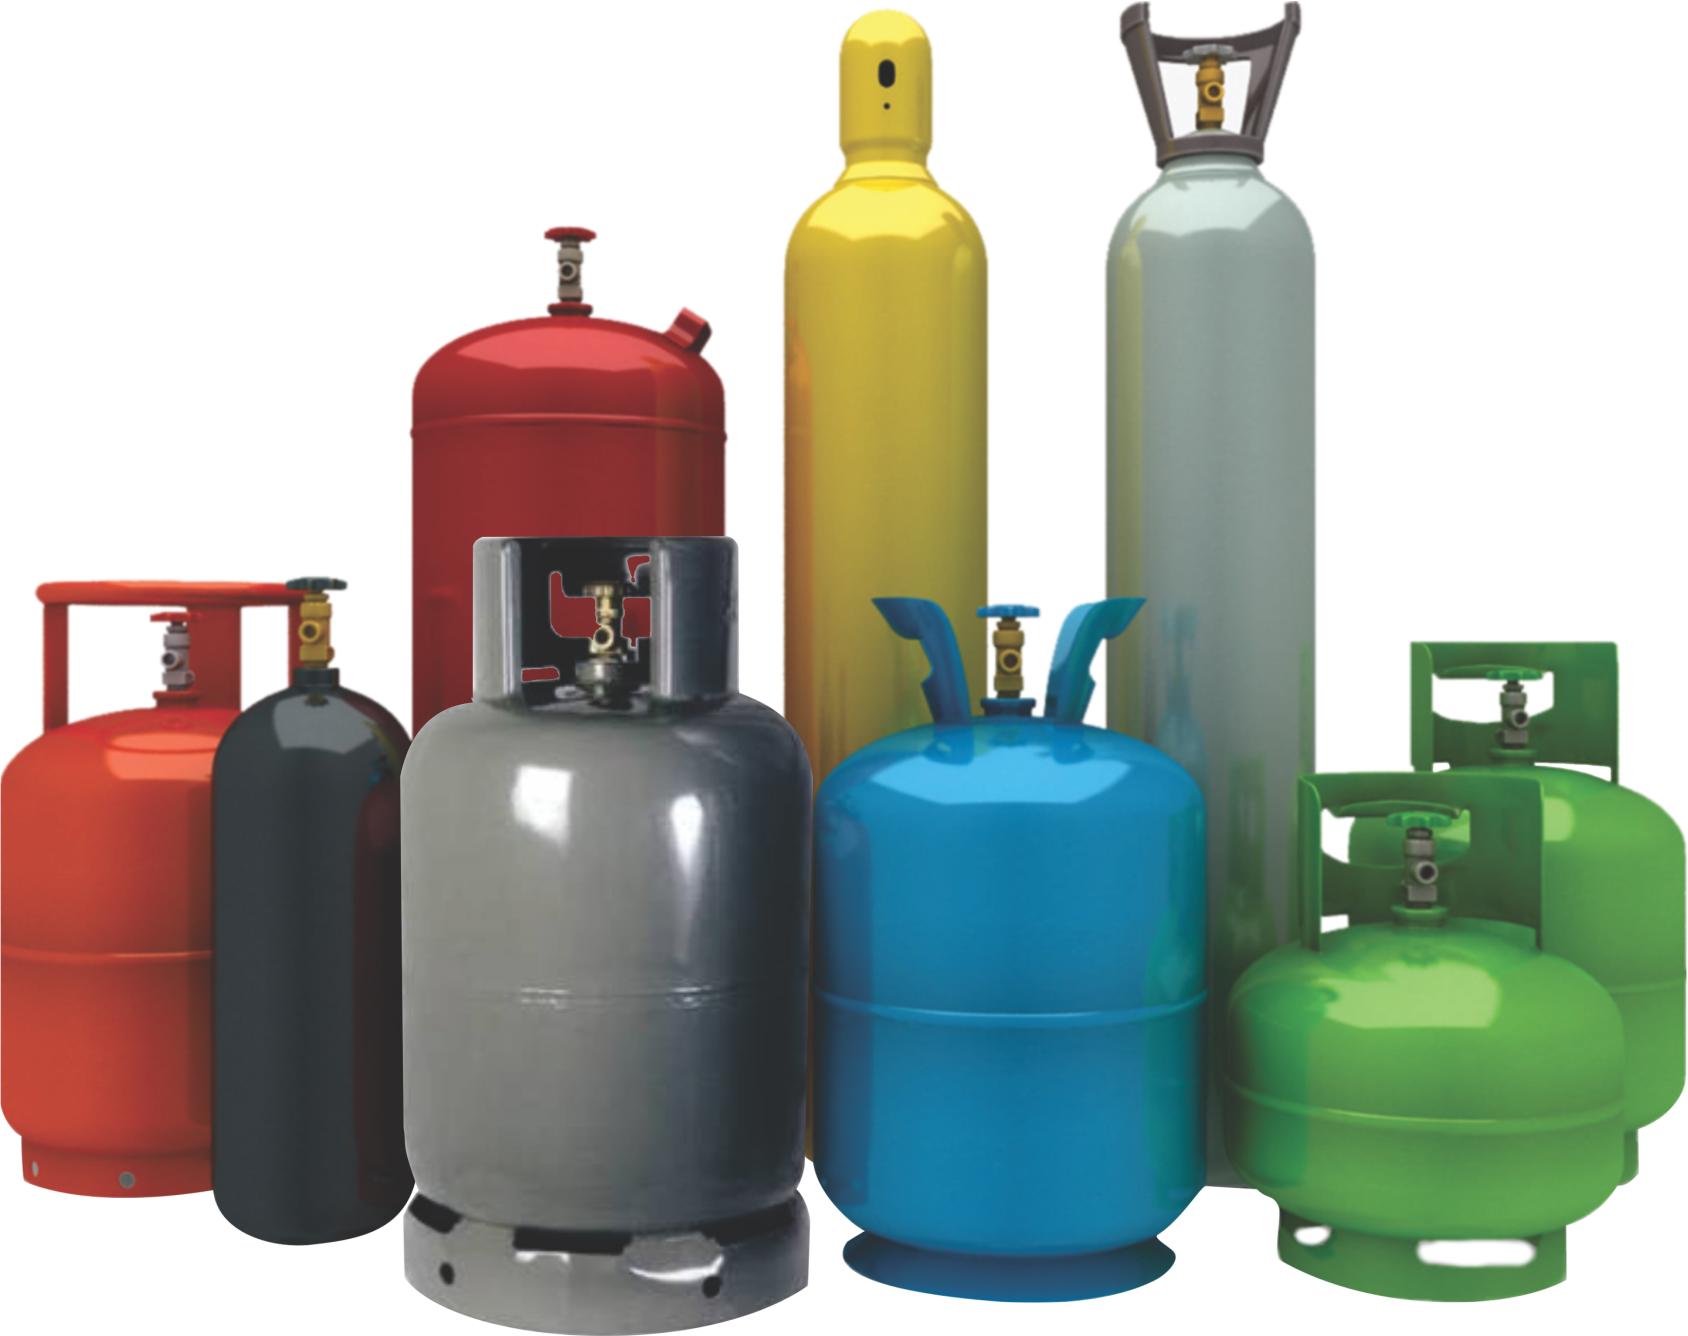 A Group Of Different Colored Cylinders